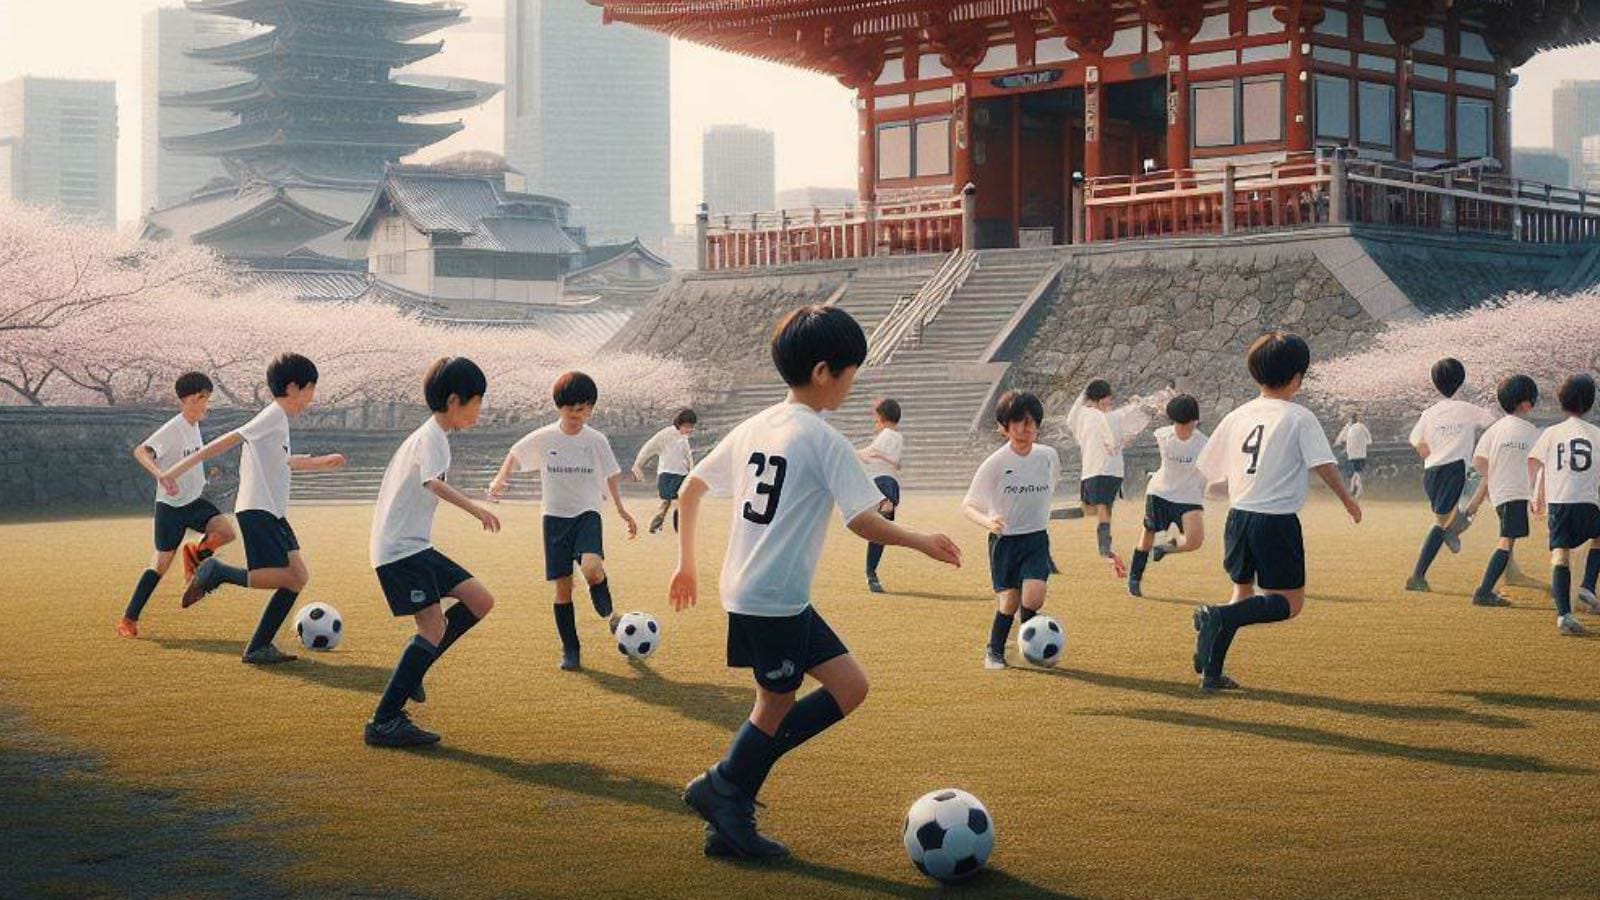 The report highlights the growing popularity of soccer in Japan